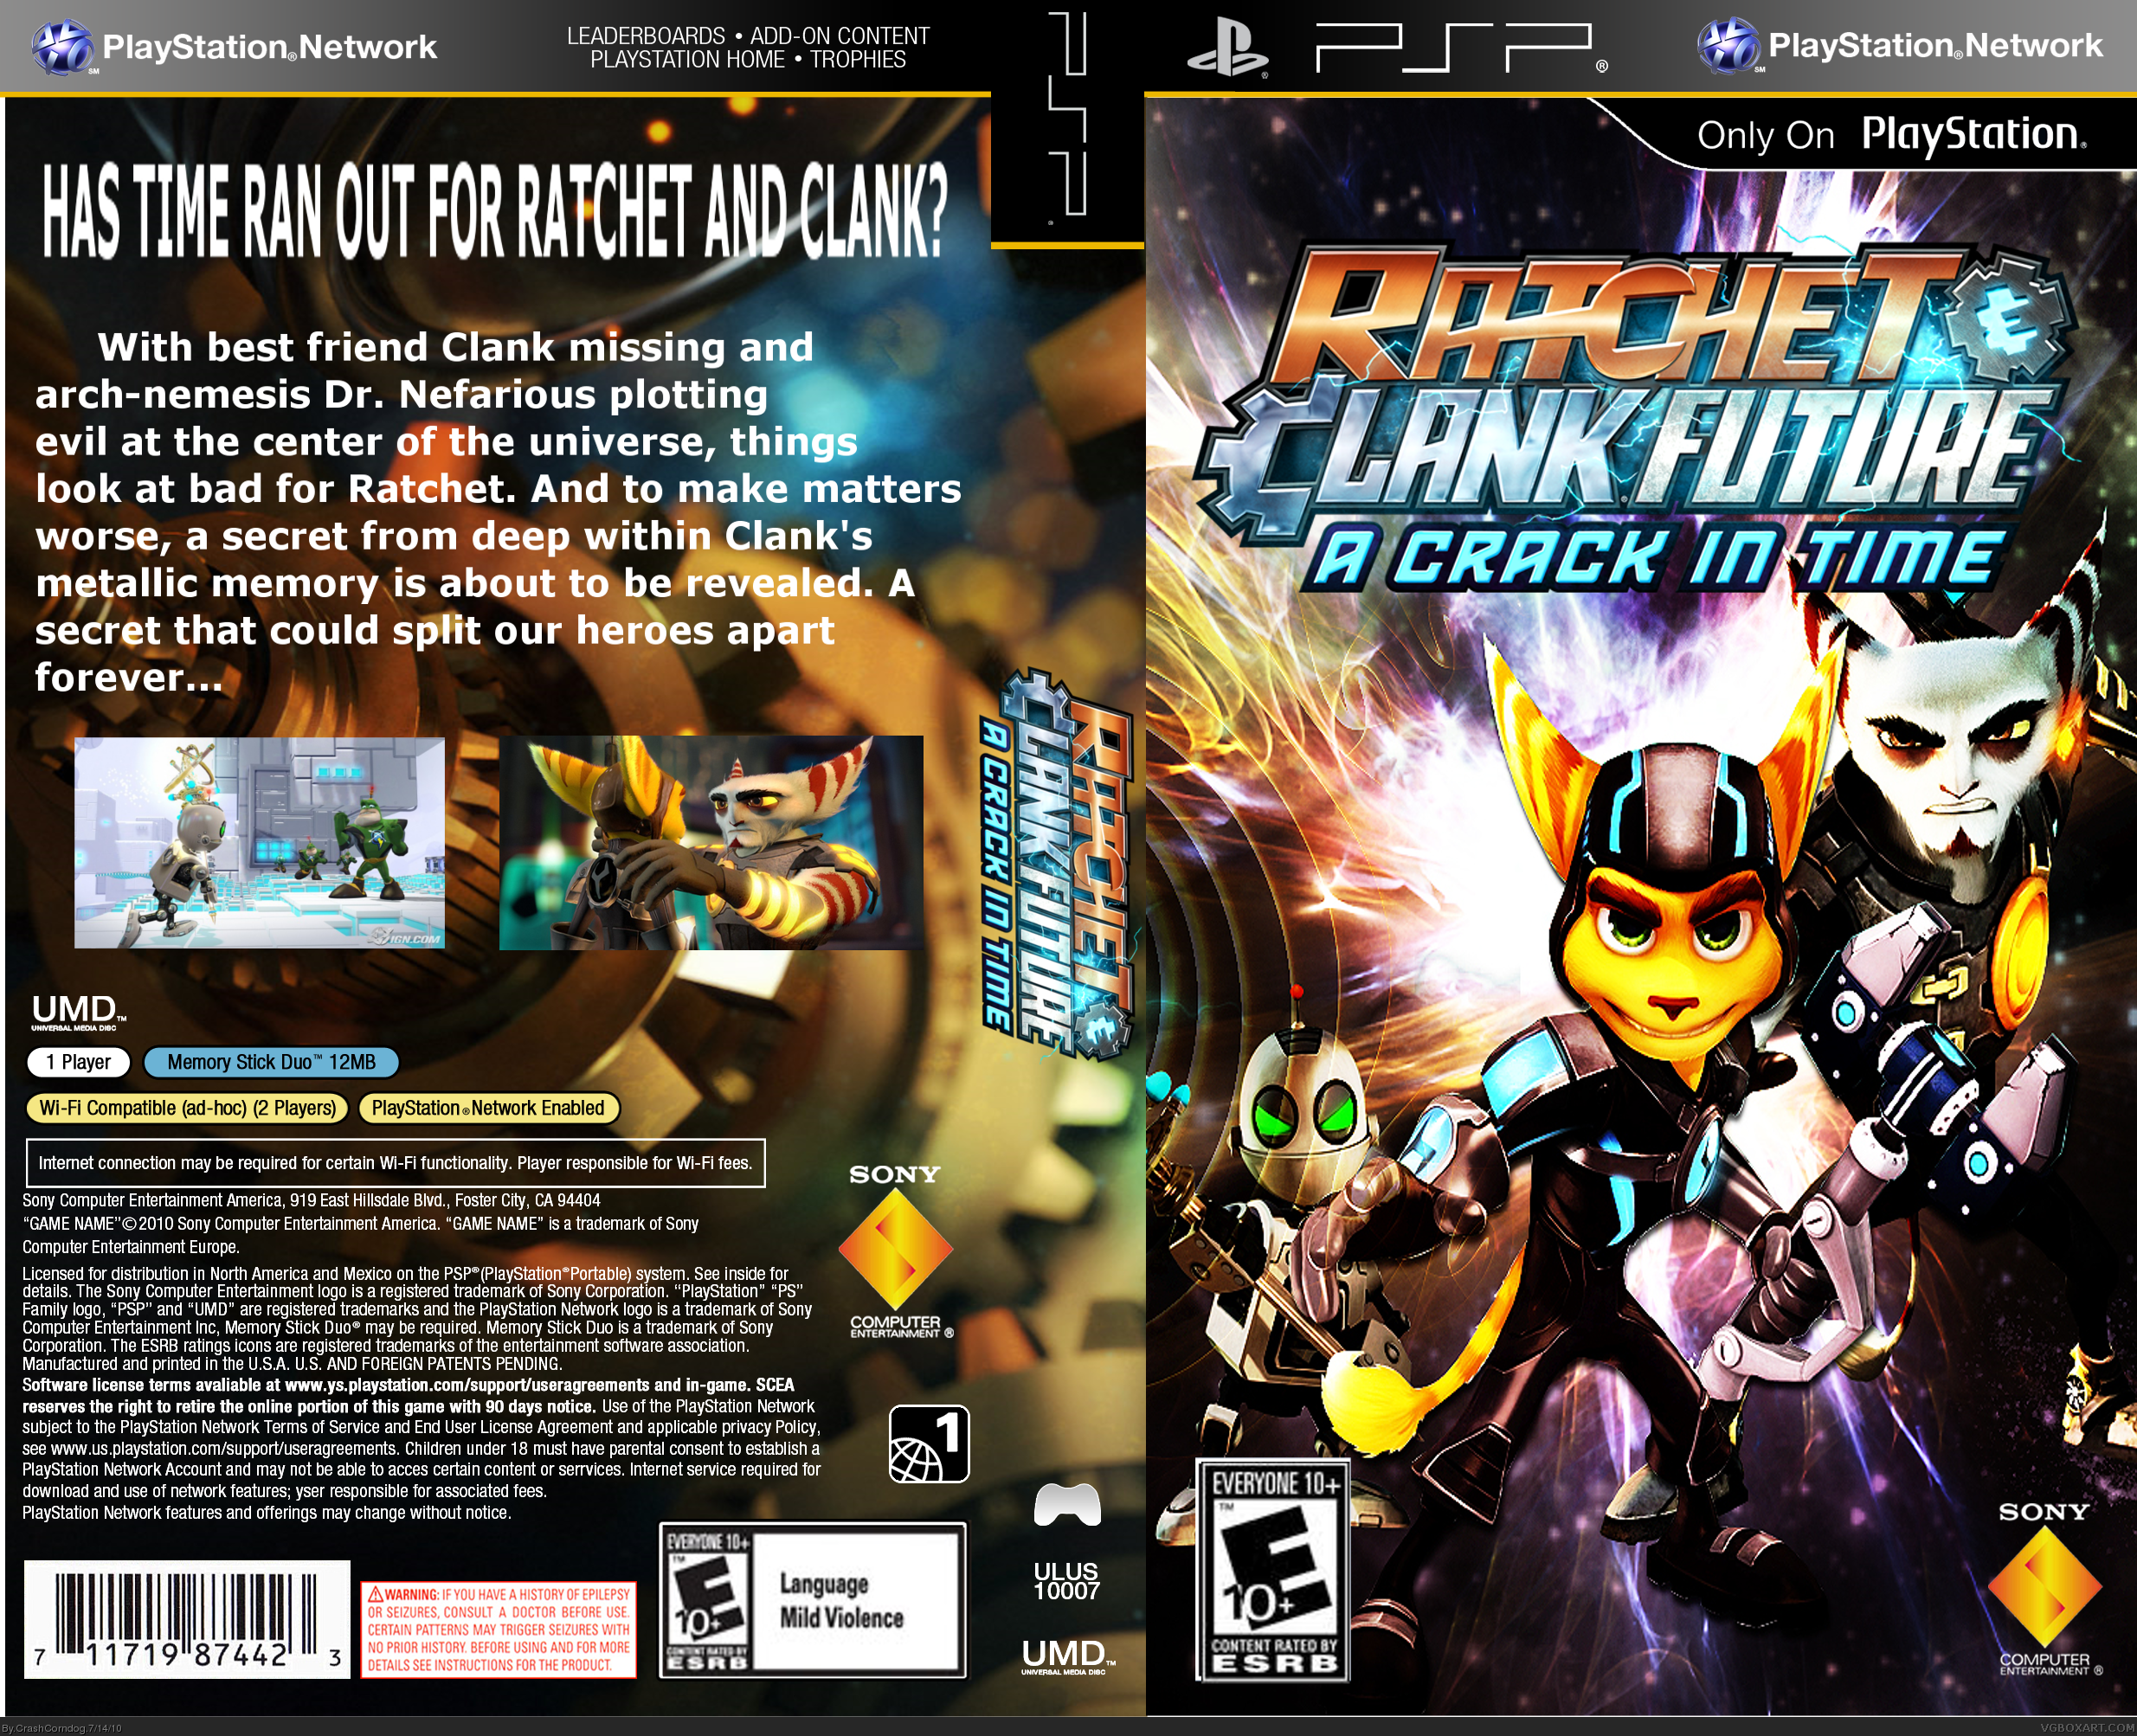 Ratchet & Clank Future: A Crack in Time cover or packaging material -  MobyGames